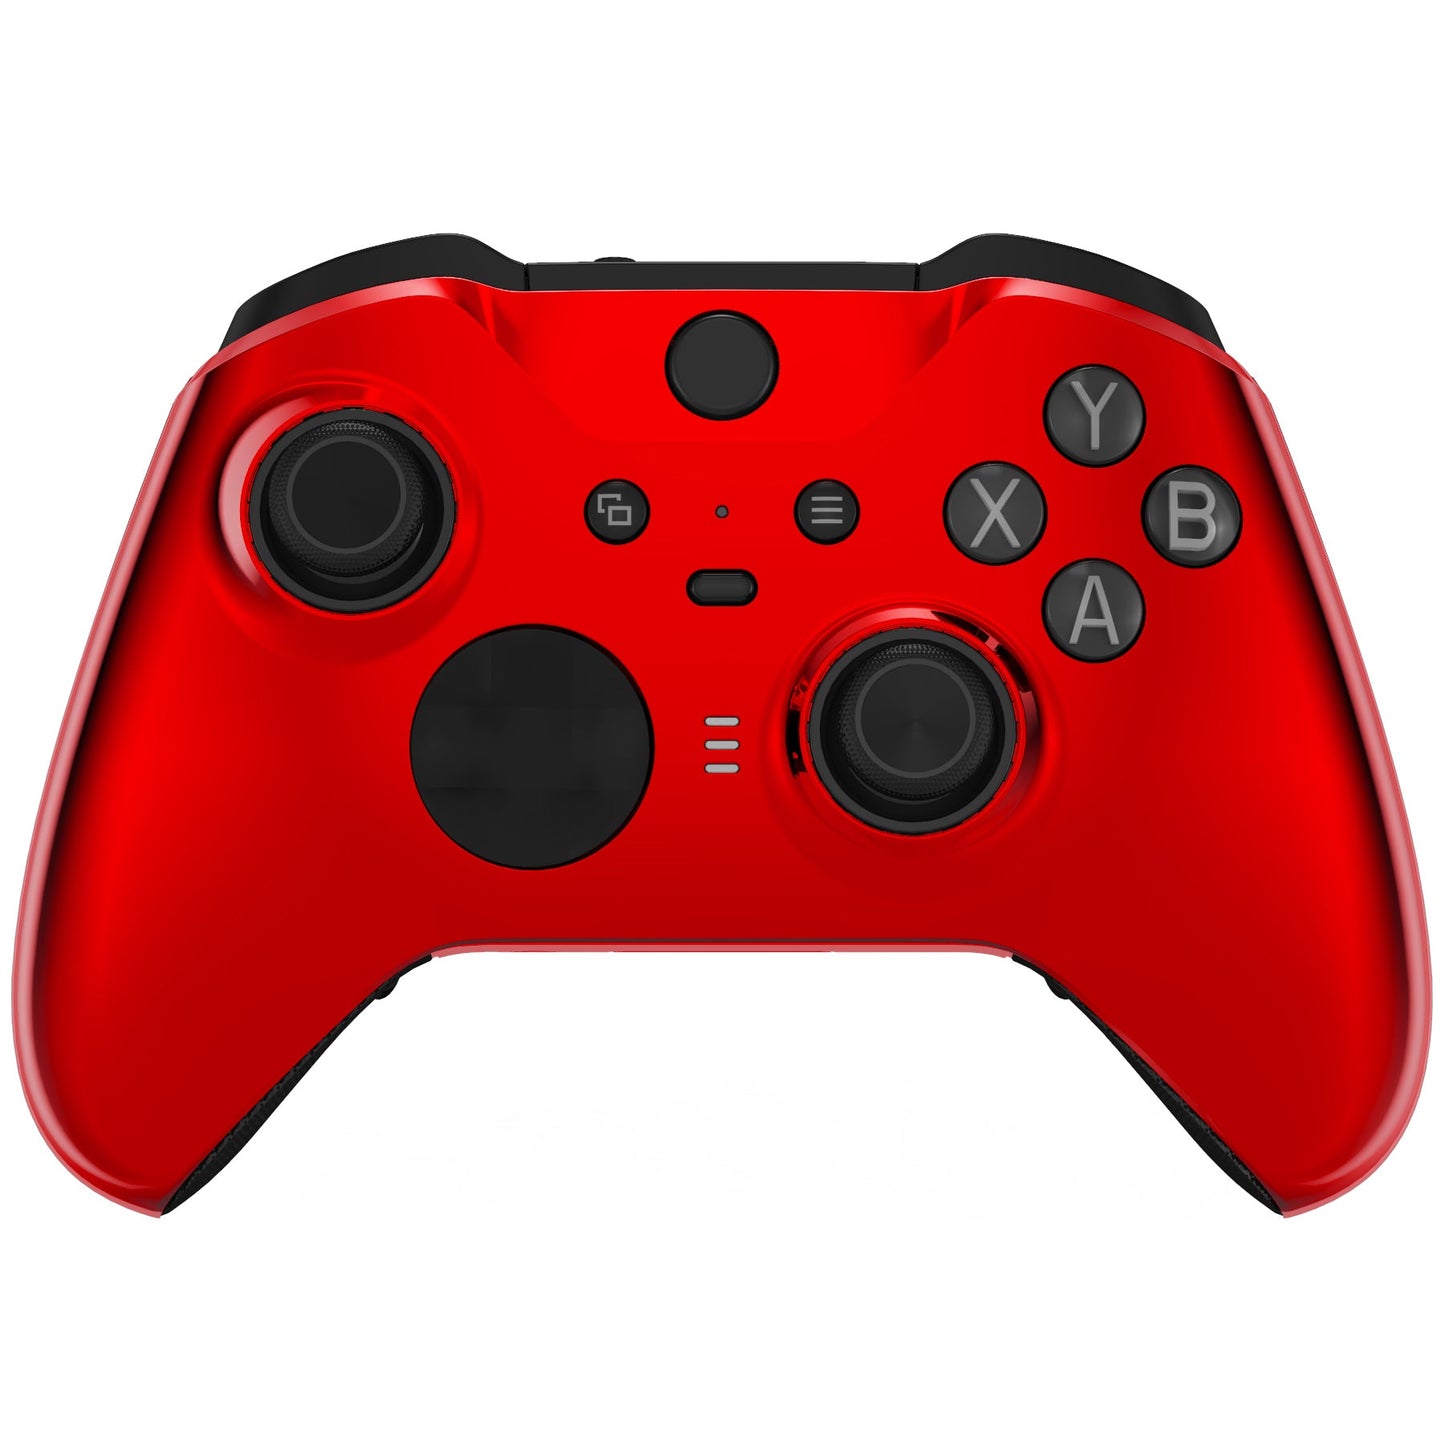 eXtremeRate Retail Chrome Red Edition Glossy Faceplate Cover, Front Housing Shell Case Replacement Kit for Xbox One Elite Series 2 Controller (Model 1797 and Core Model 1797) - Thumbstick Accent Rings Included - ELD403